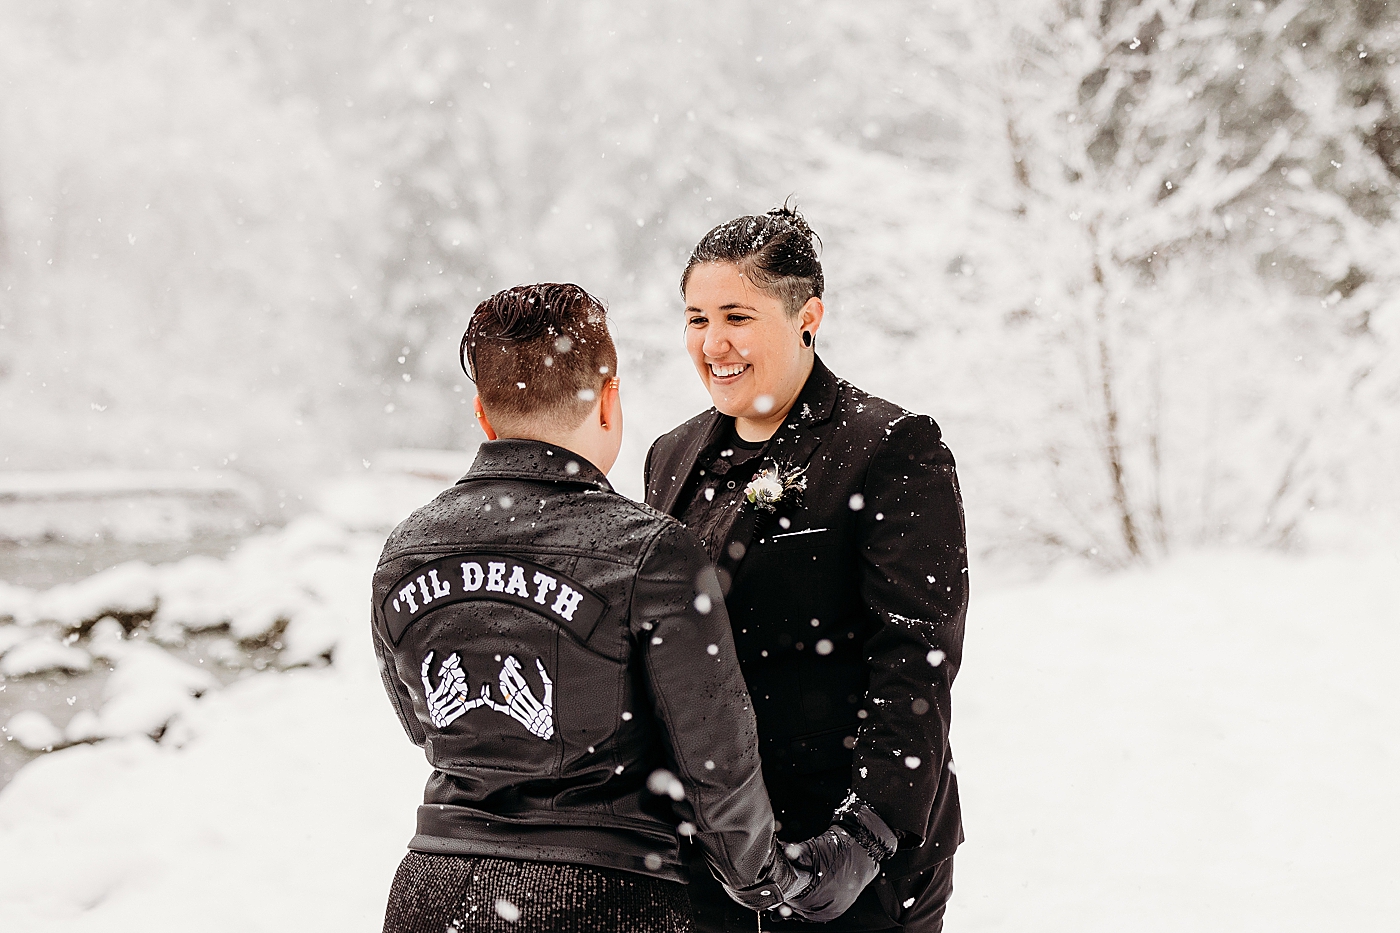 Vow exchange at Middle Fork bridge in the WA. Photo by Megan Montalvo Photography.